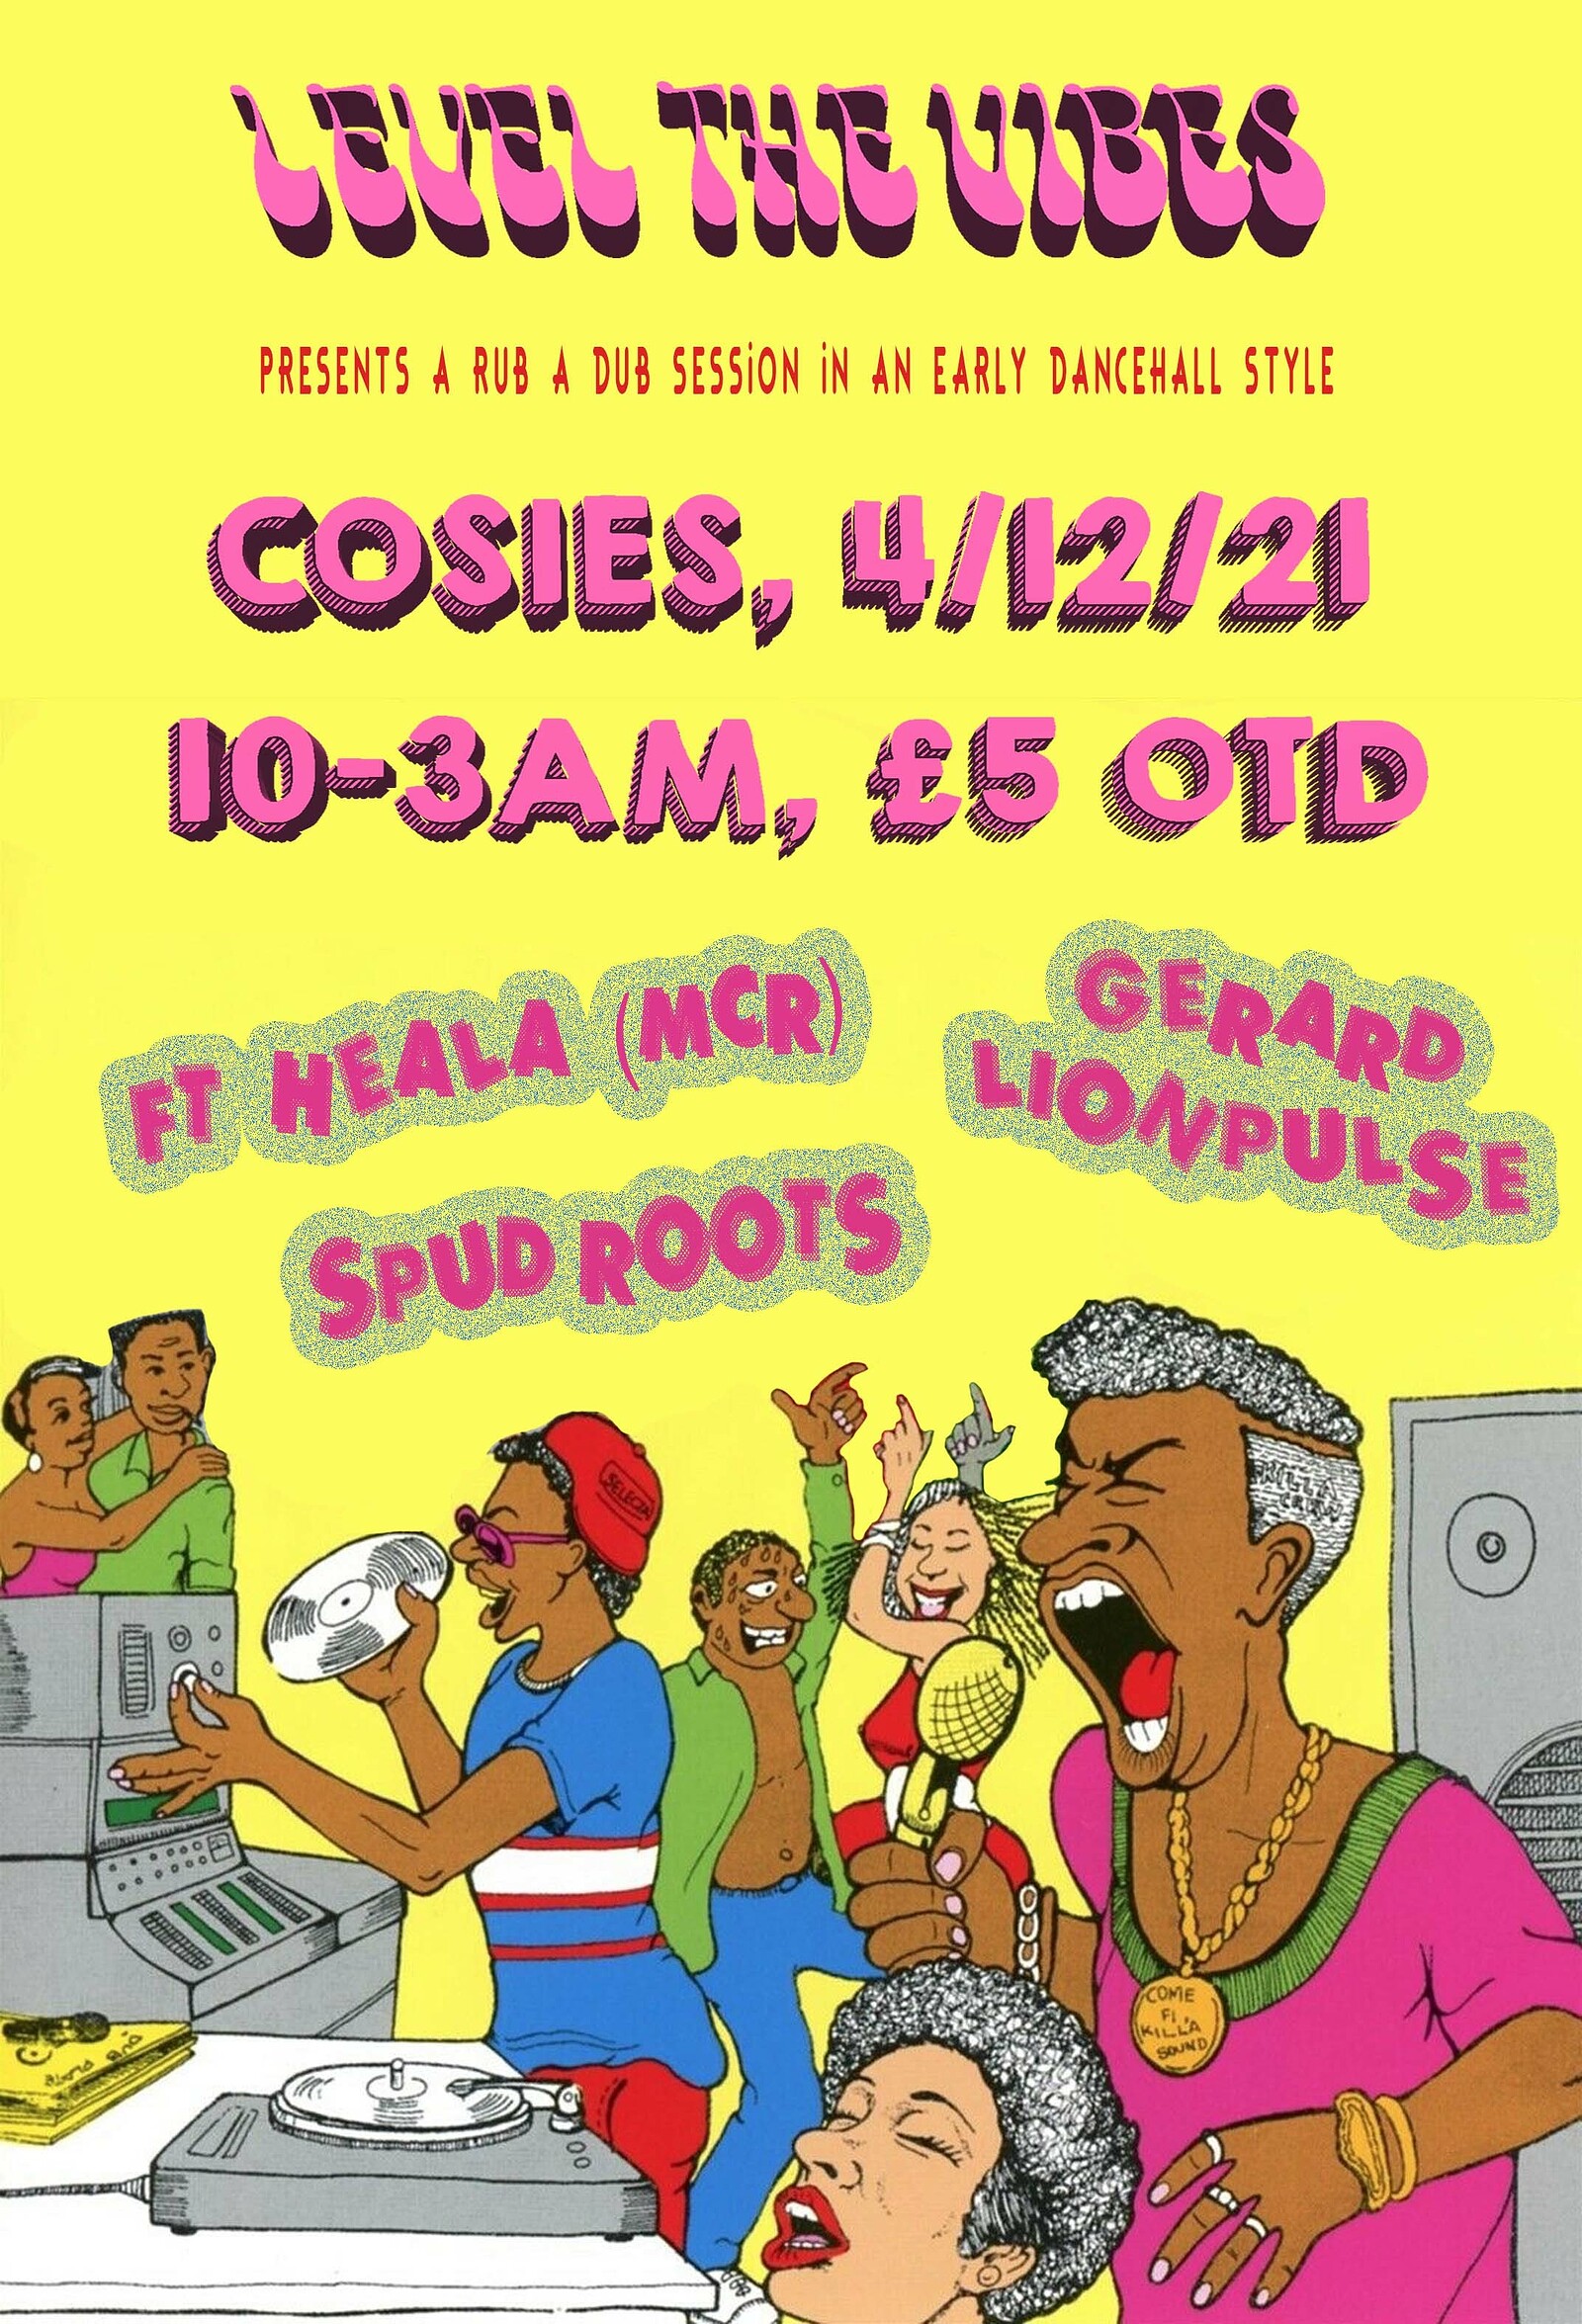 Level the Vibes Ft. Heala, Spud Roots & Lionpulse at Cosies